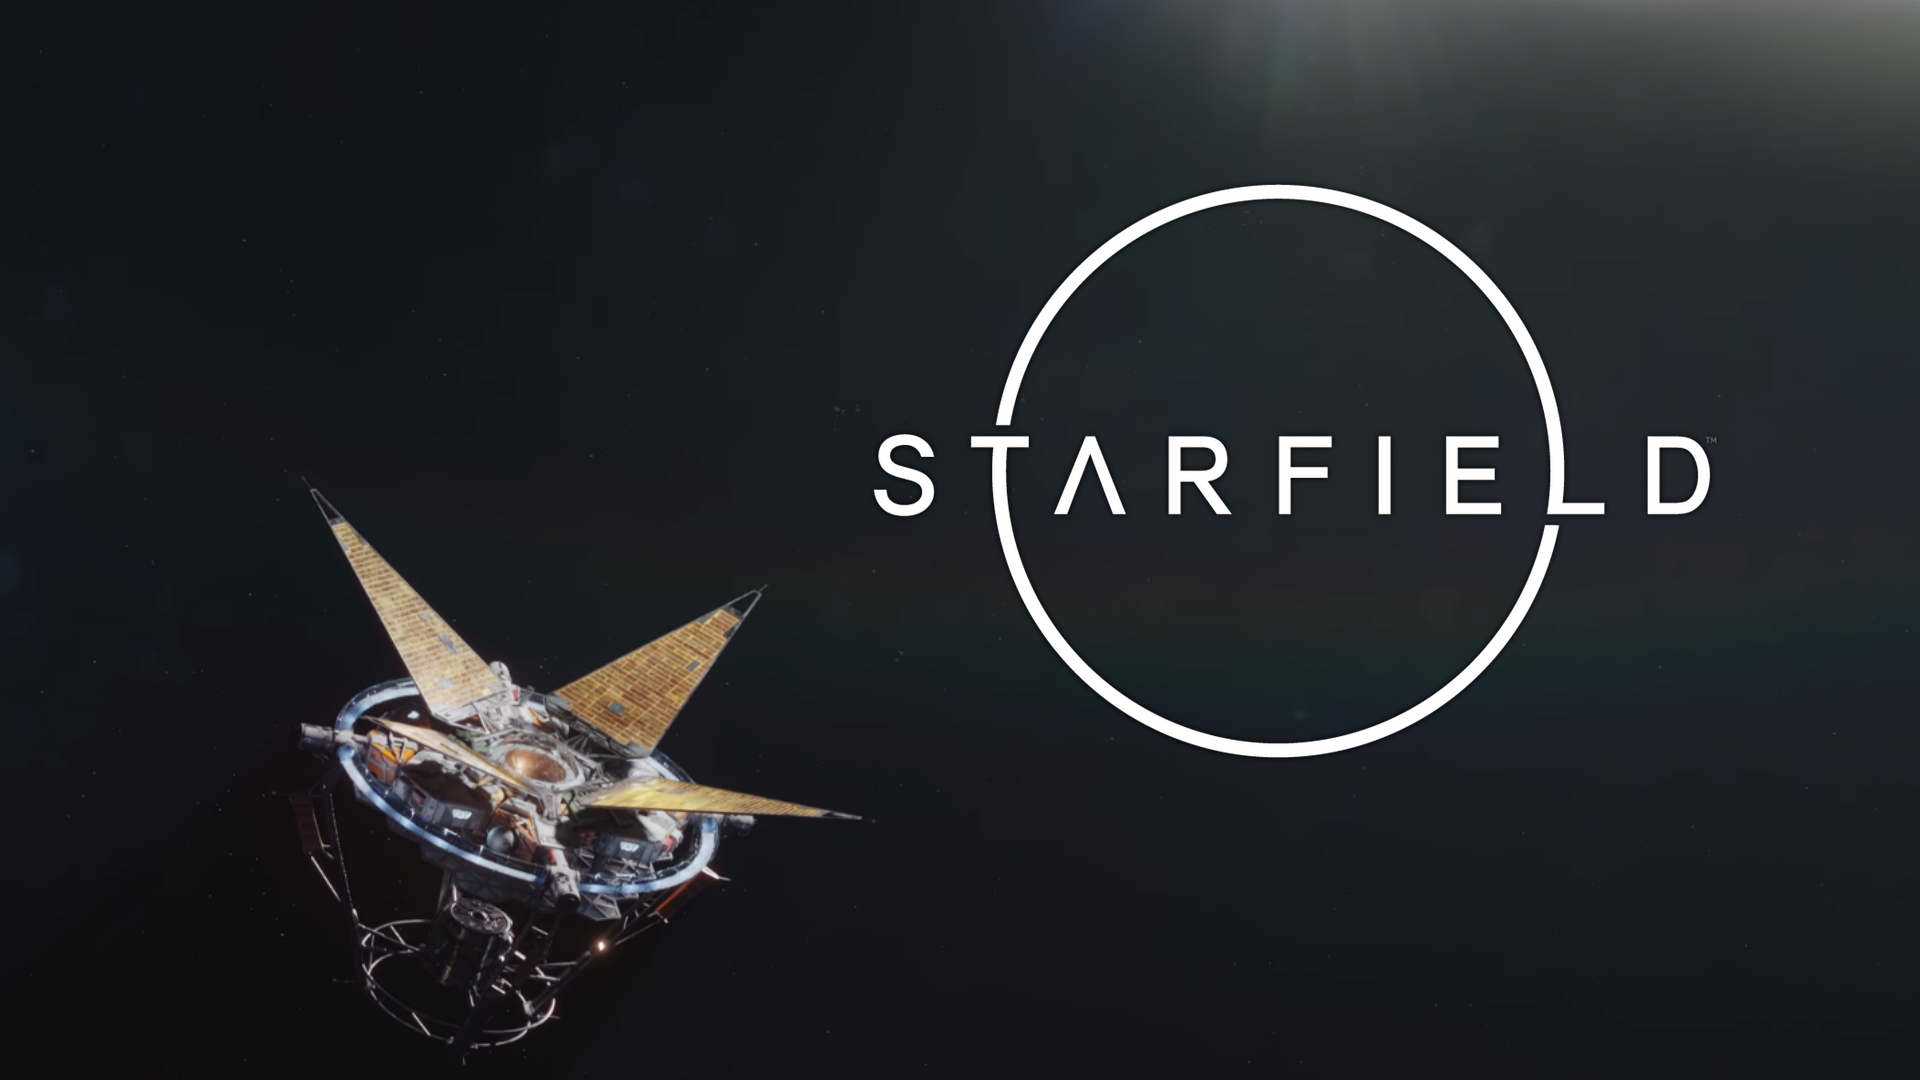 Starfield download the new